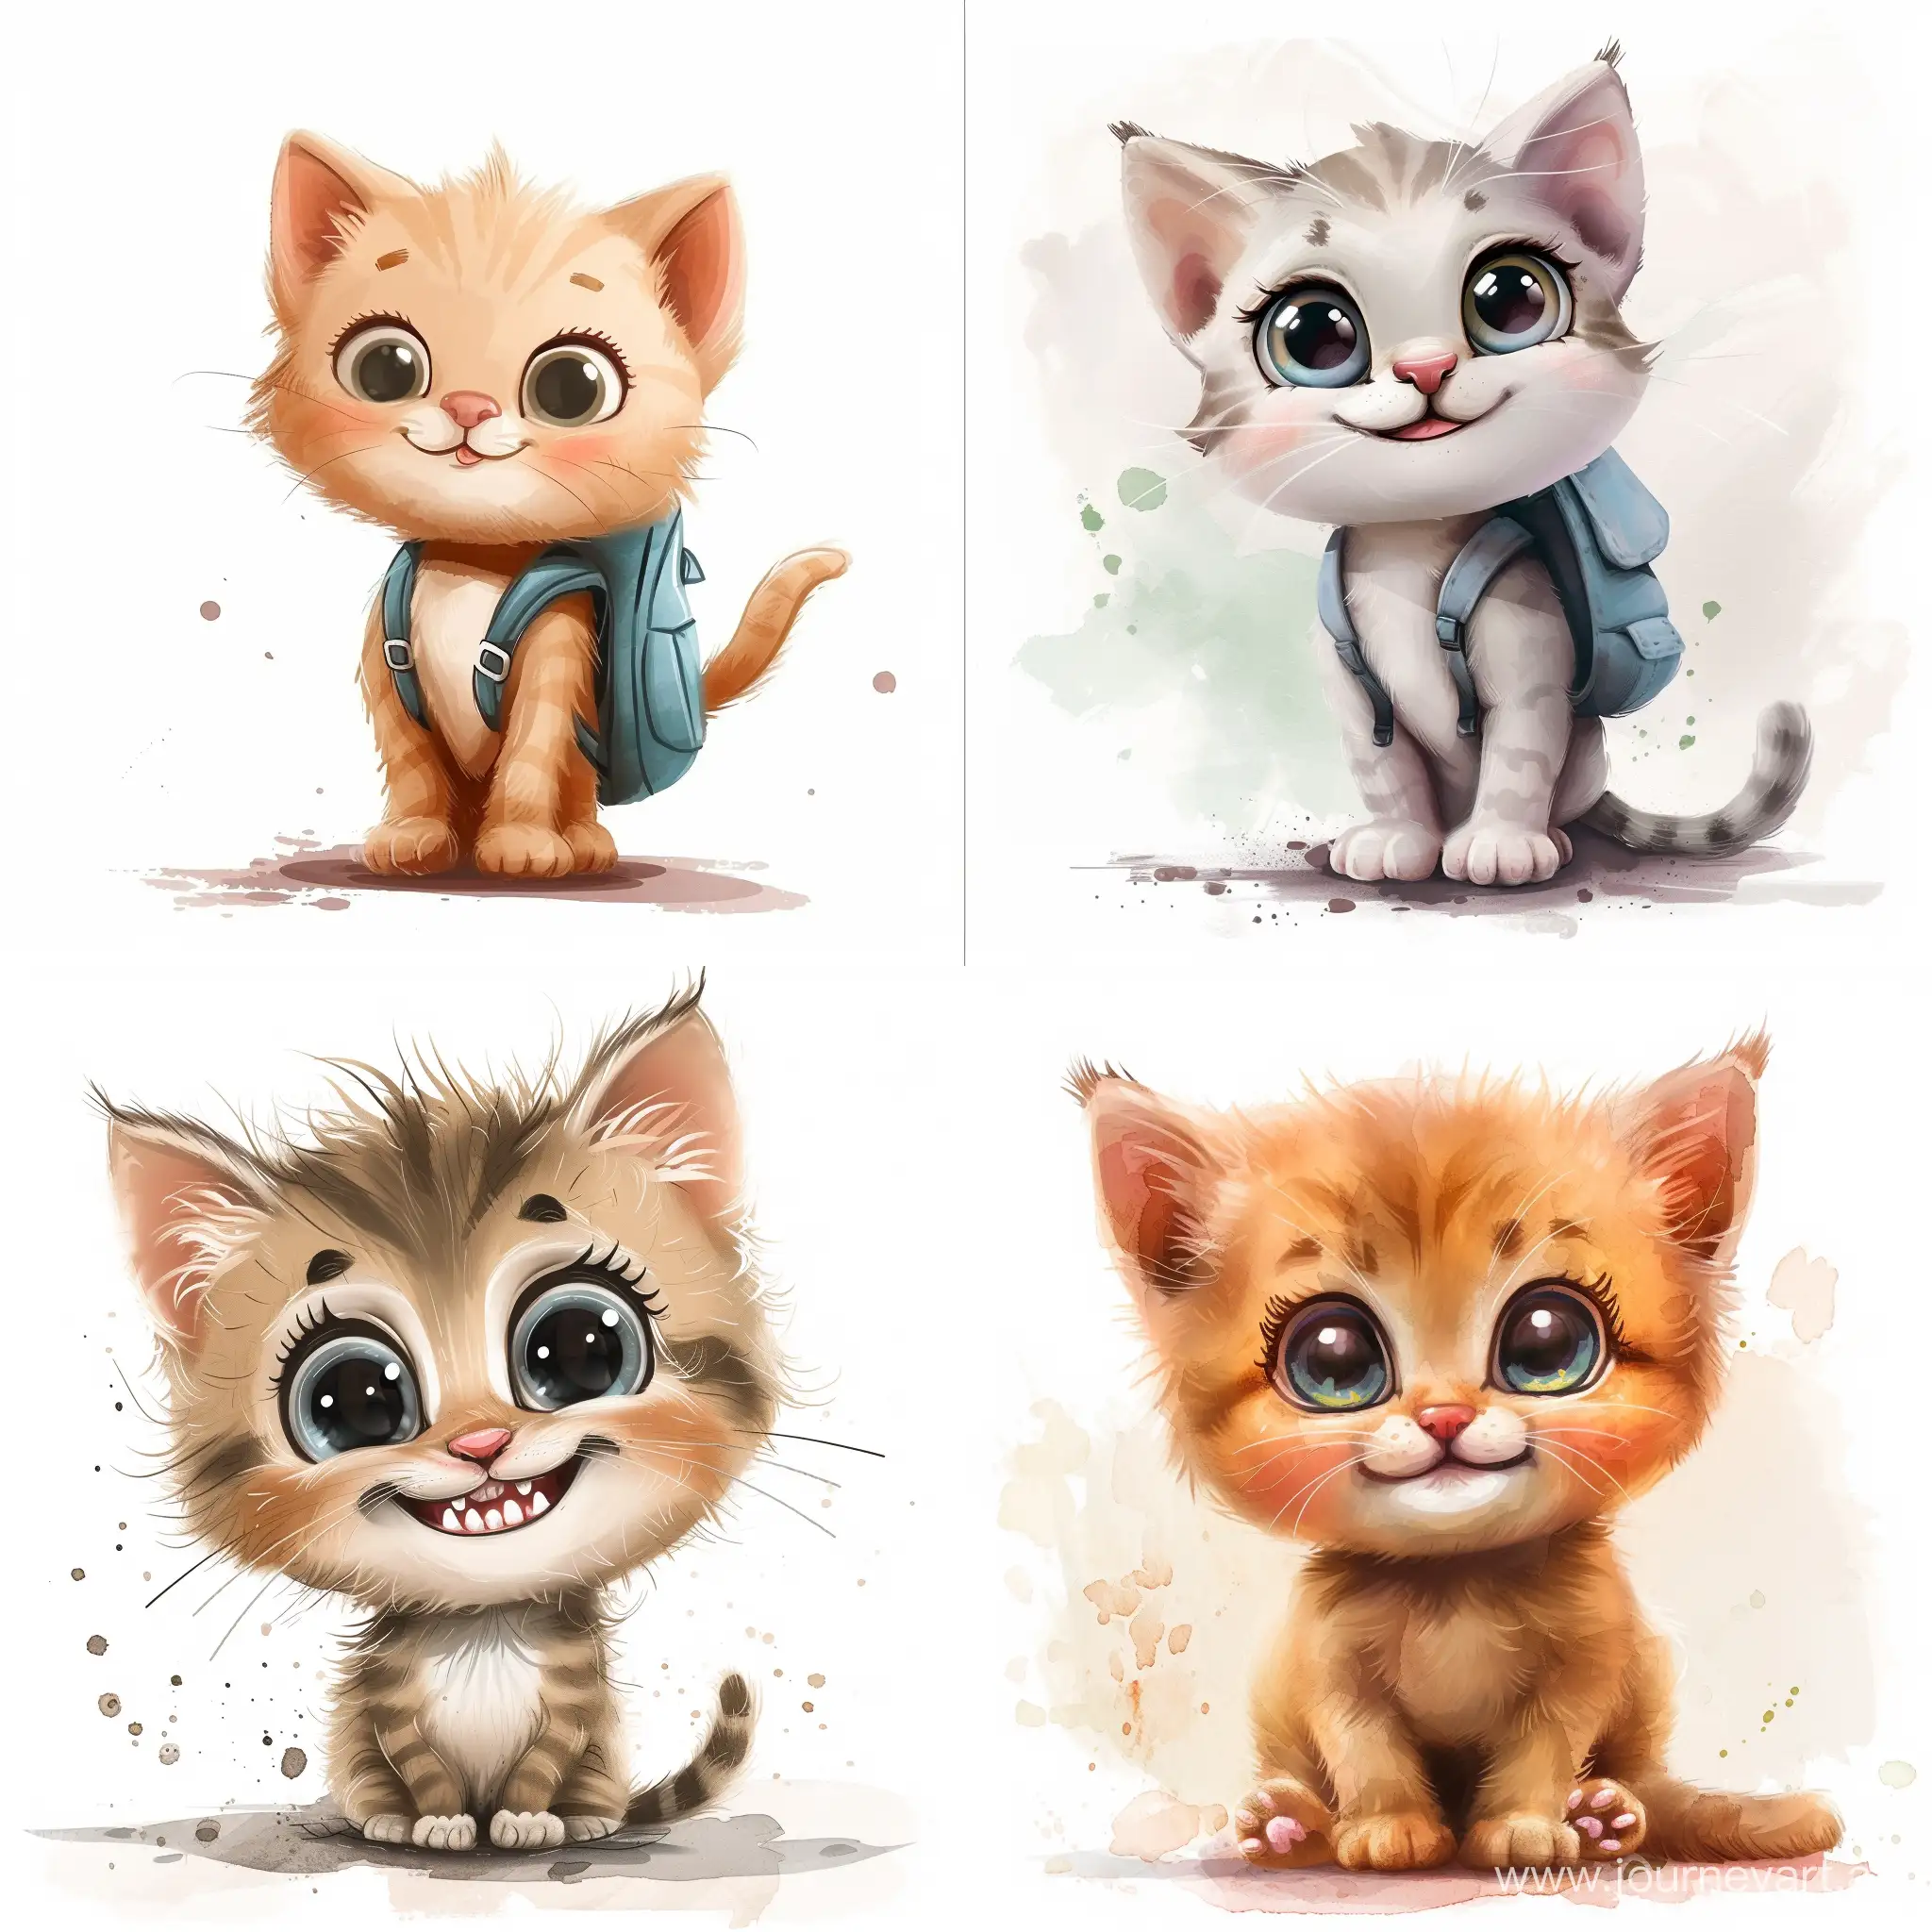 Adorable-Kitten-Schooler-Cartoon-with-Joyful-Smile-and-Big-Eyes-on-a-Watercolor-White-Background